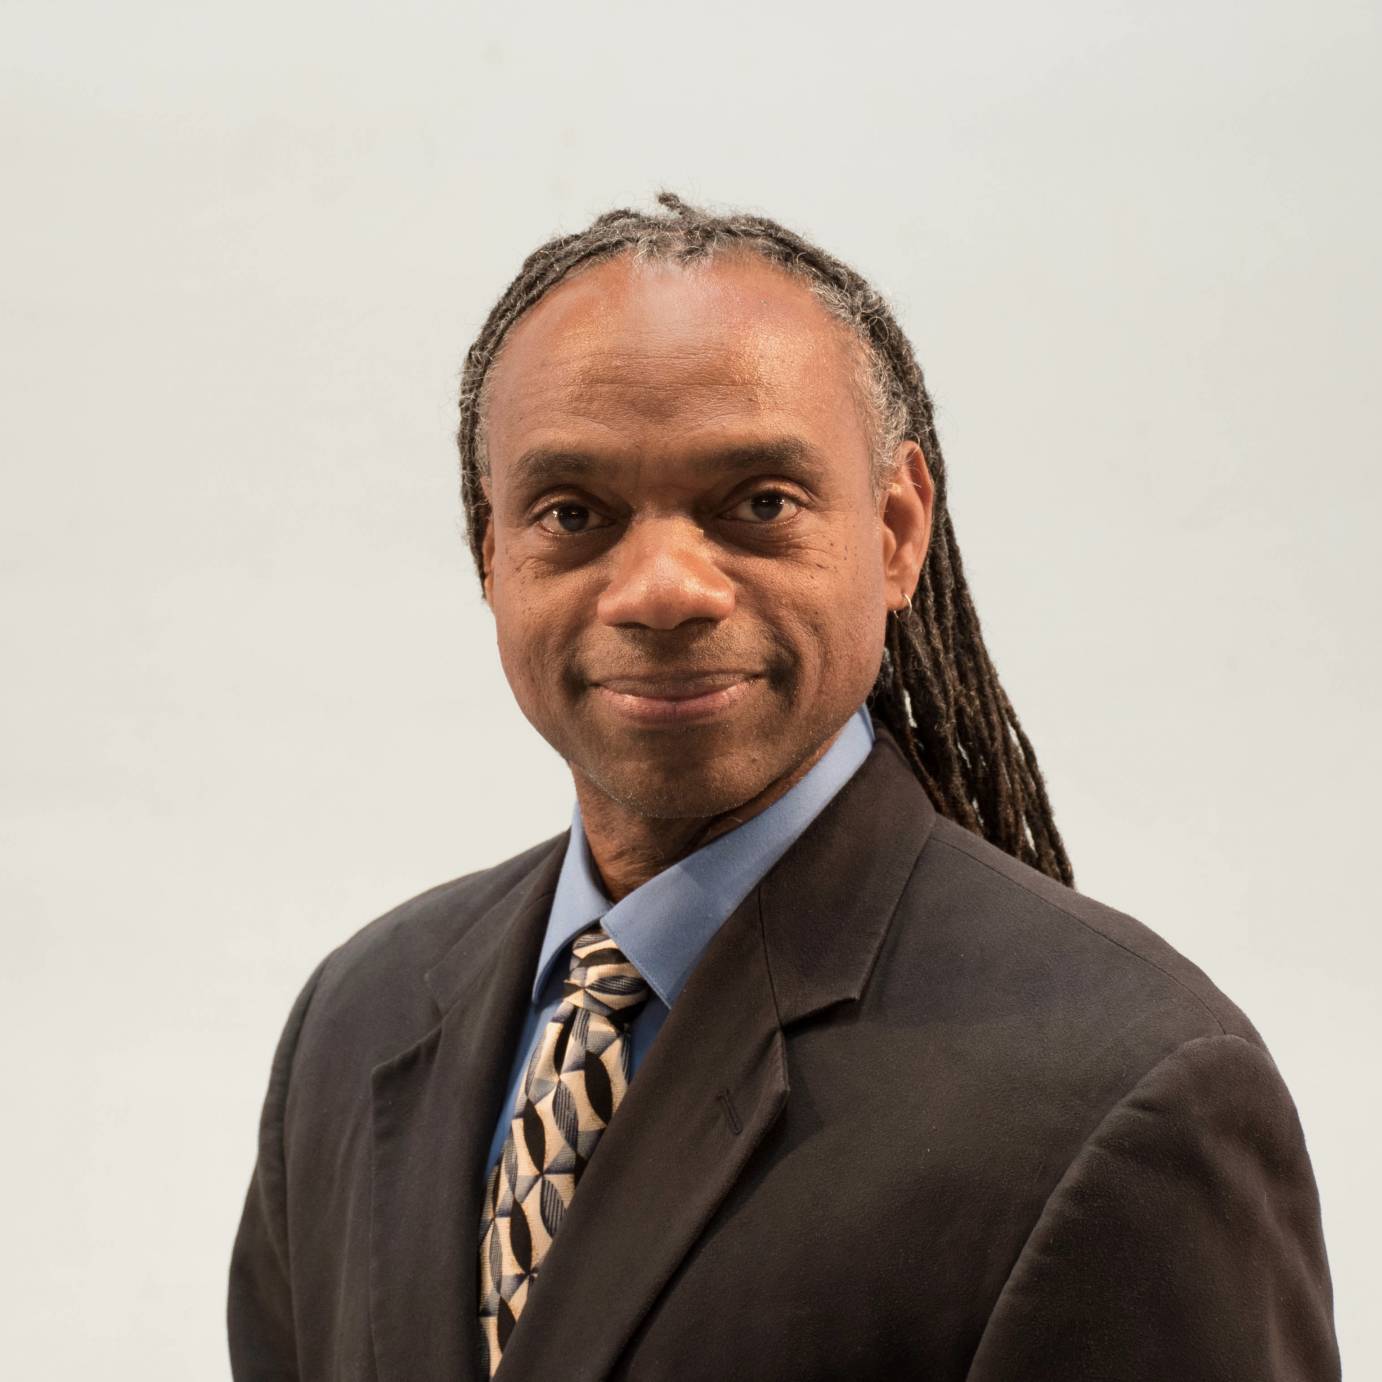 Professor Paul Anthony Dennis, an African American male with greying dreadlocks, is wearing a smart suit with a blue collared shirt and a patterned neck tie. 